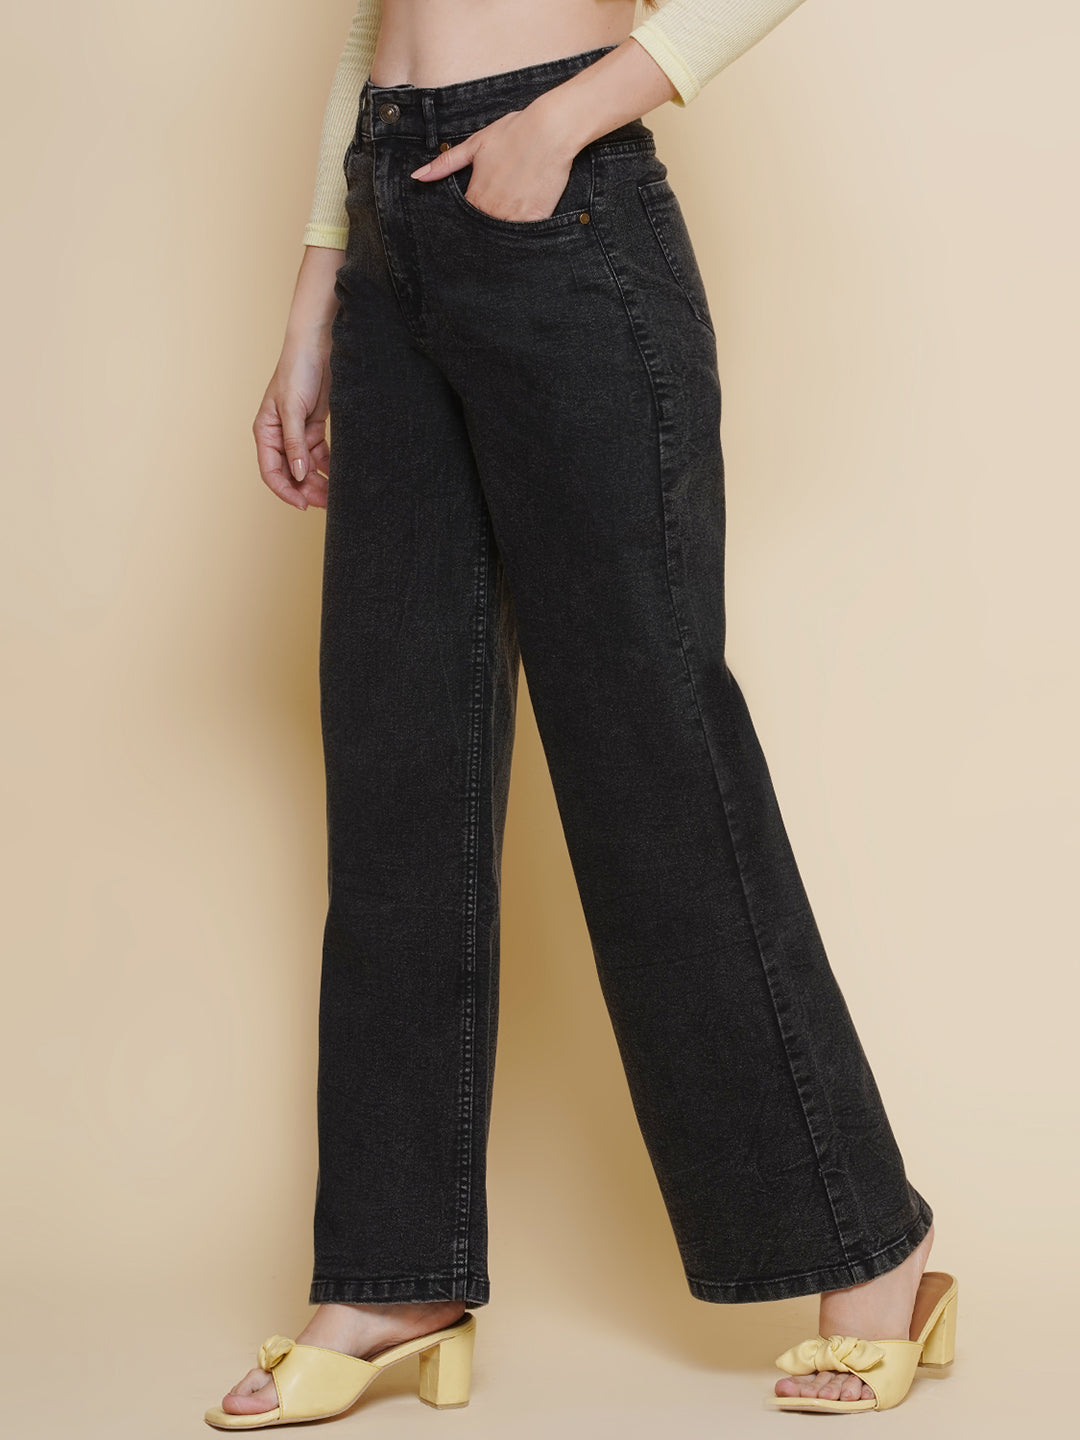 Womens Charcoal Grey Straight Fit Jeans